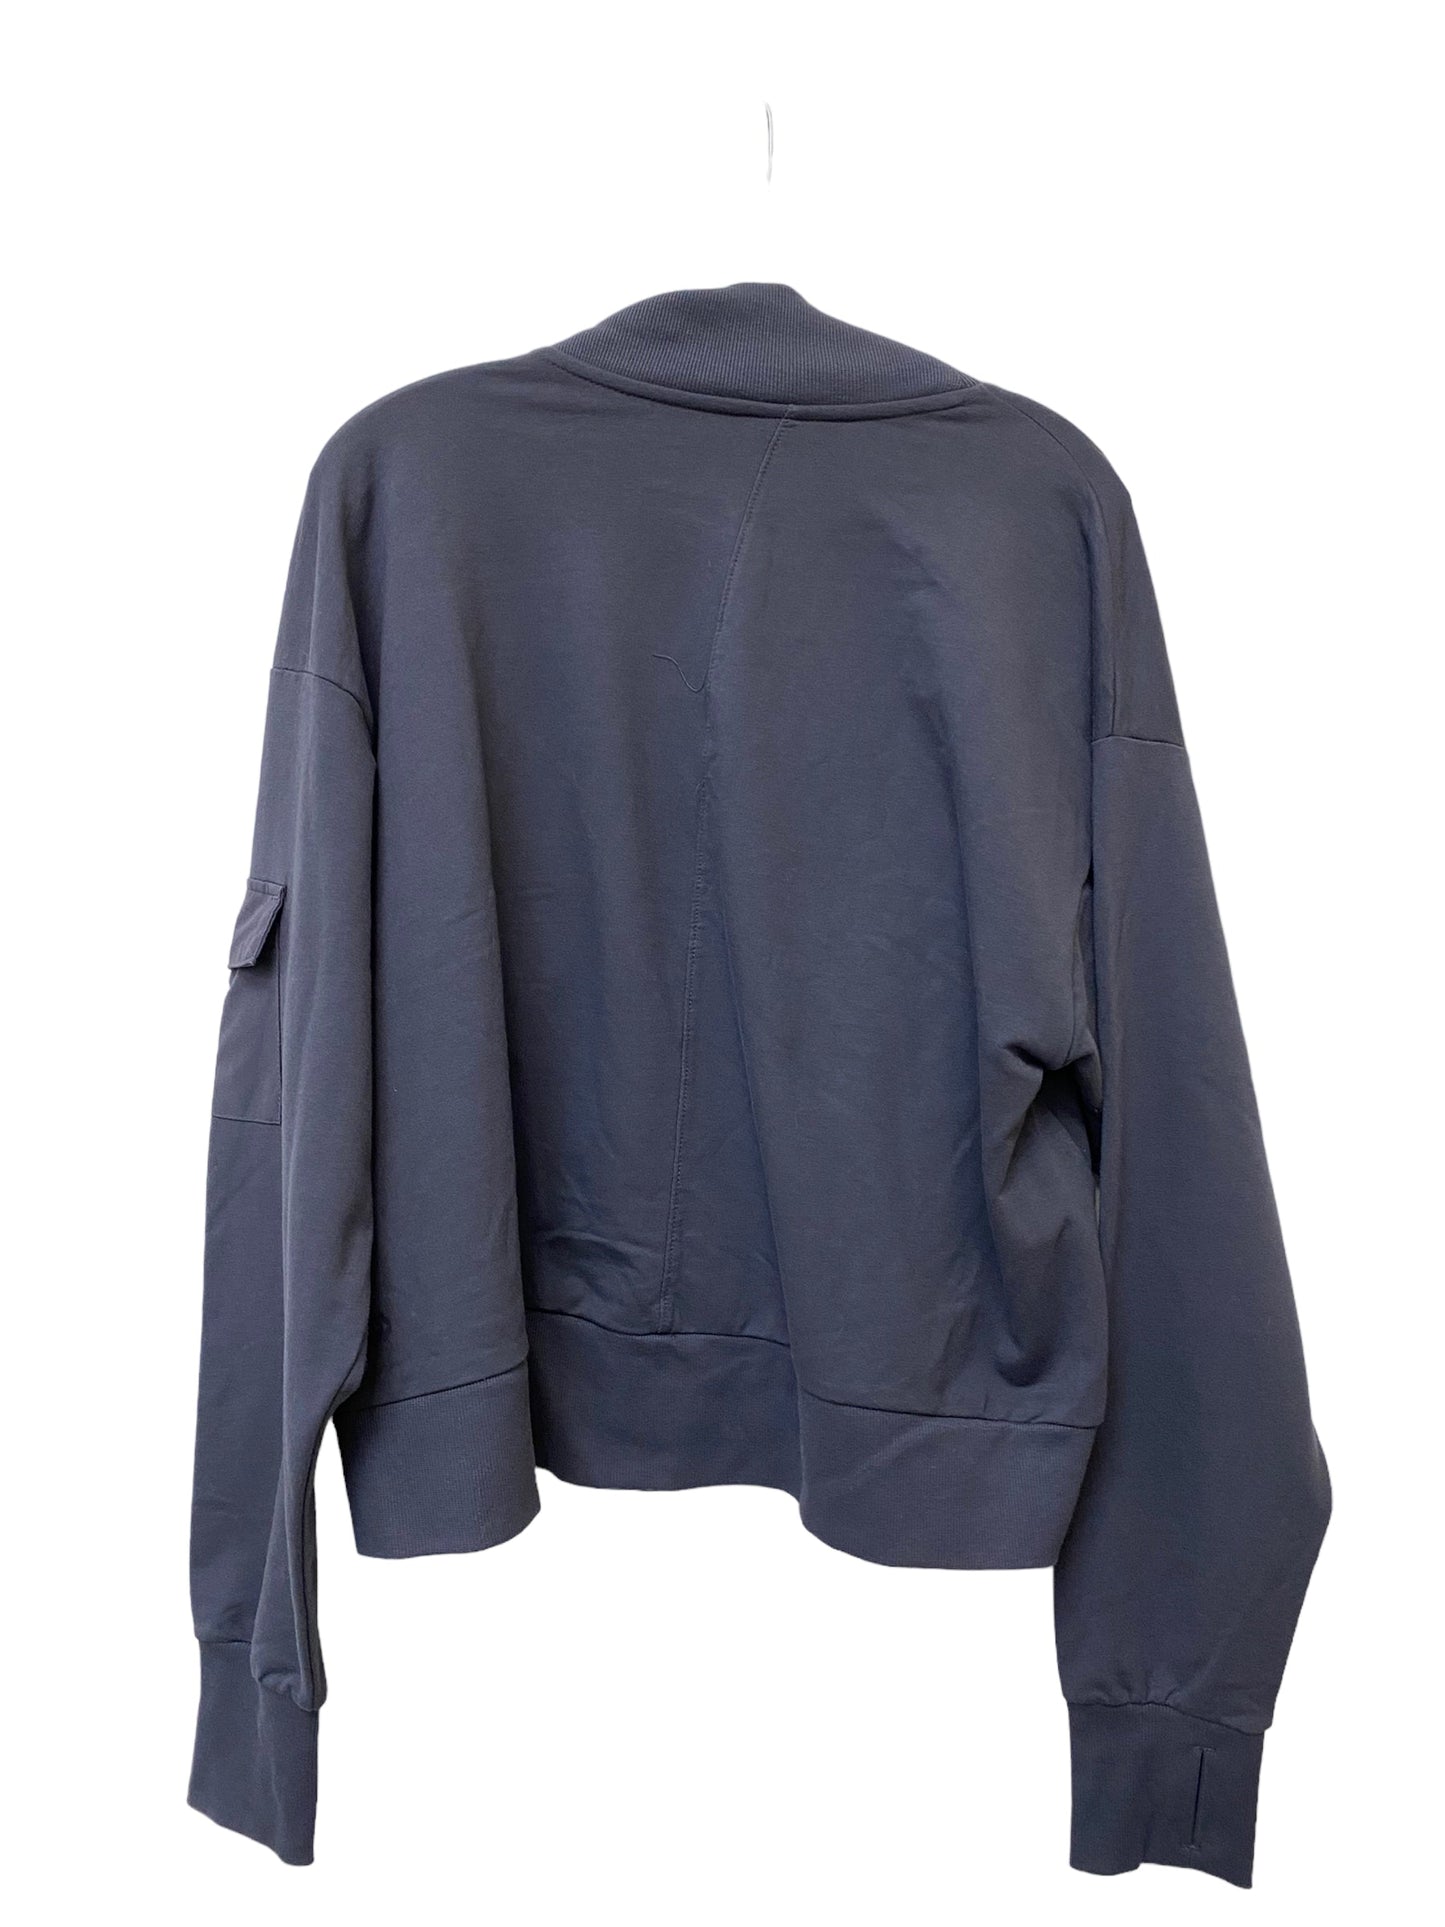 Top Long Sleeve By All In Motion  Size: 2x